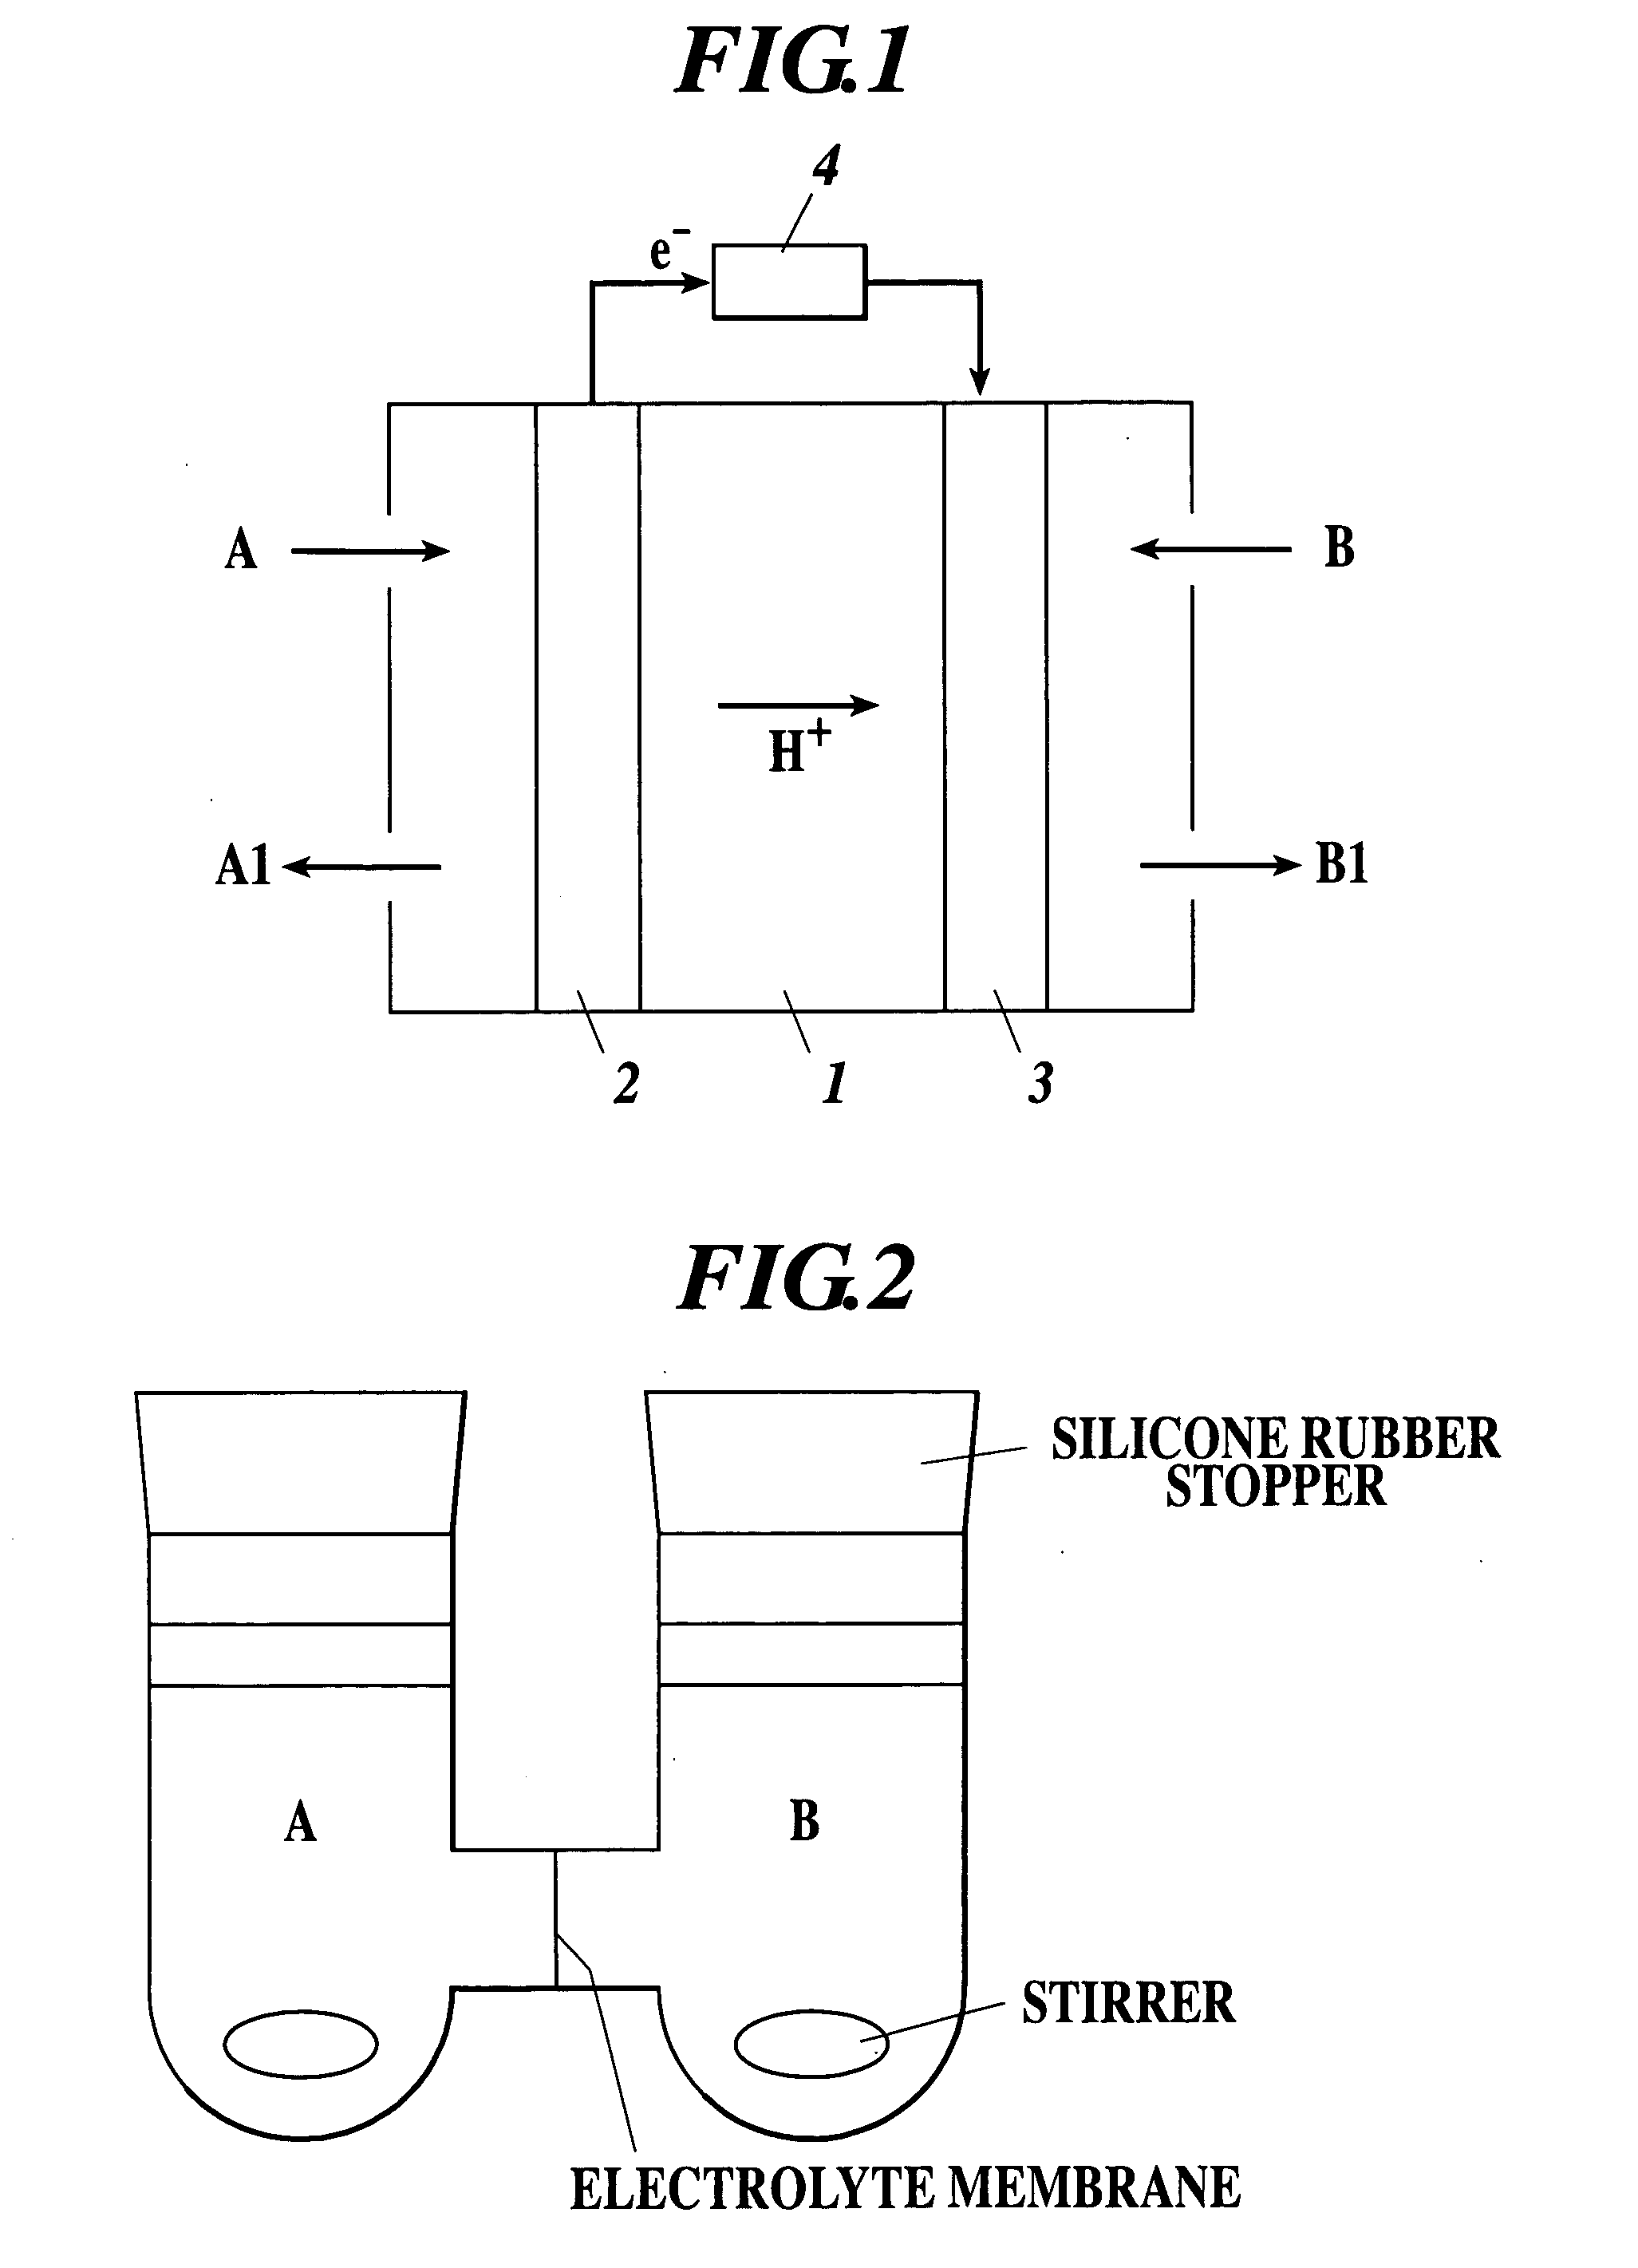 Proton conductive electrolyte membrane, solid polymer fuel cell and method for producing proton conductive electrolyte membrane